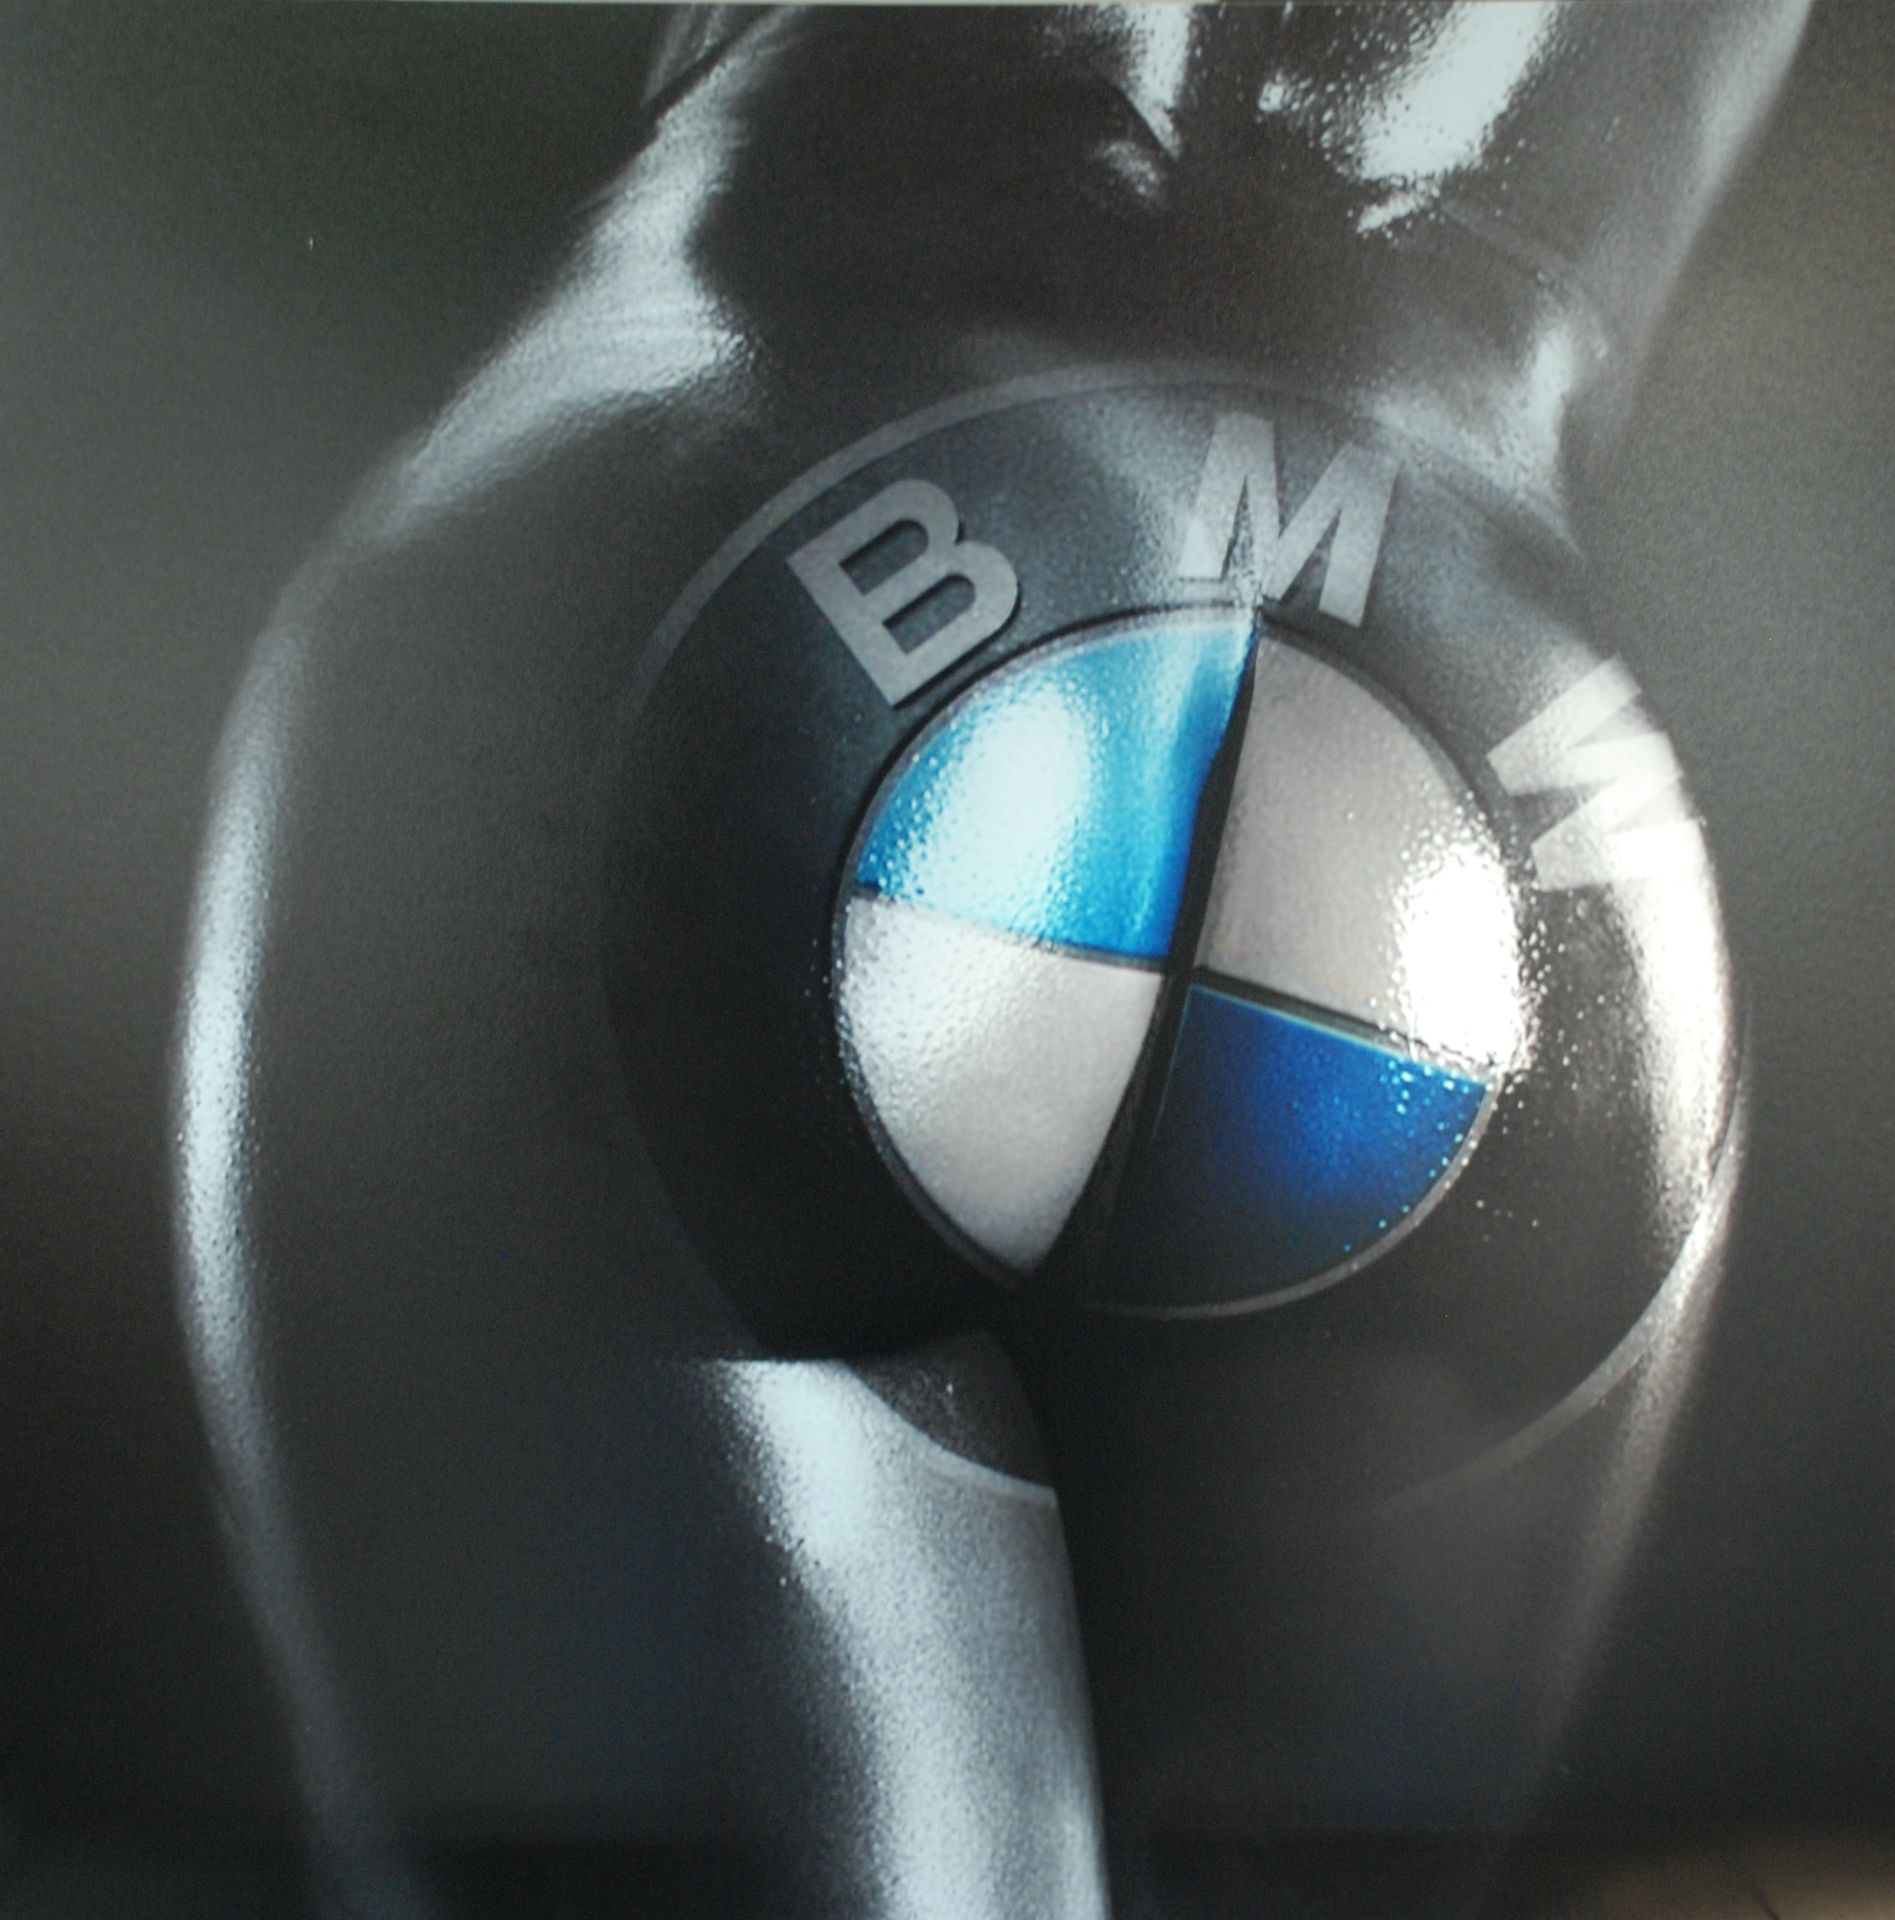 F2B F2B - Buttocks BMW

Digigraphy on aluminium

Signed and numbered on the back&hellip;